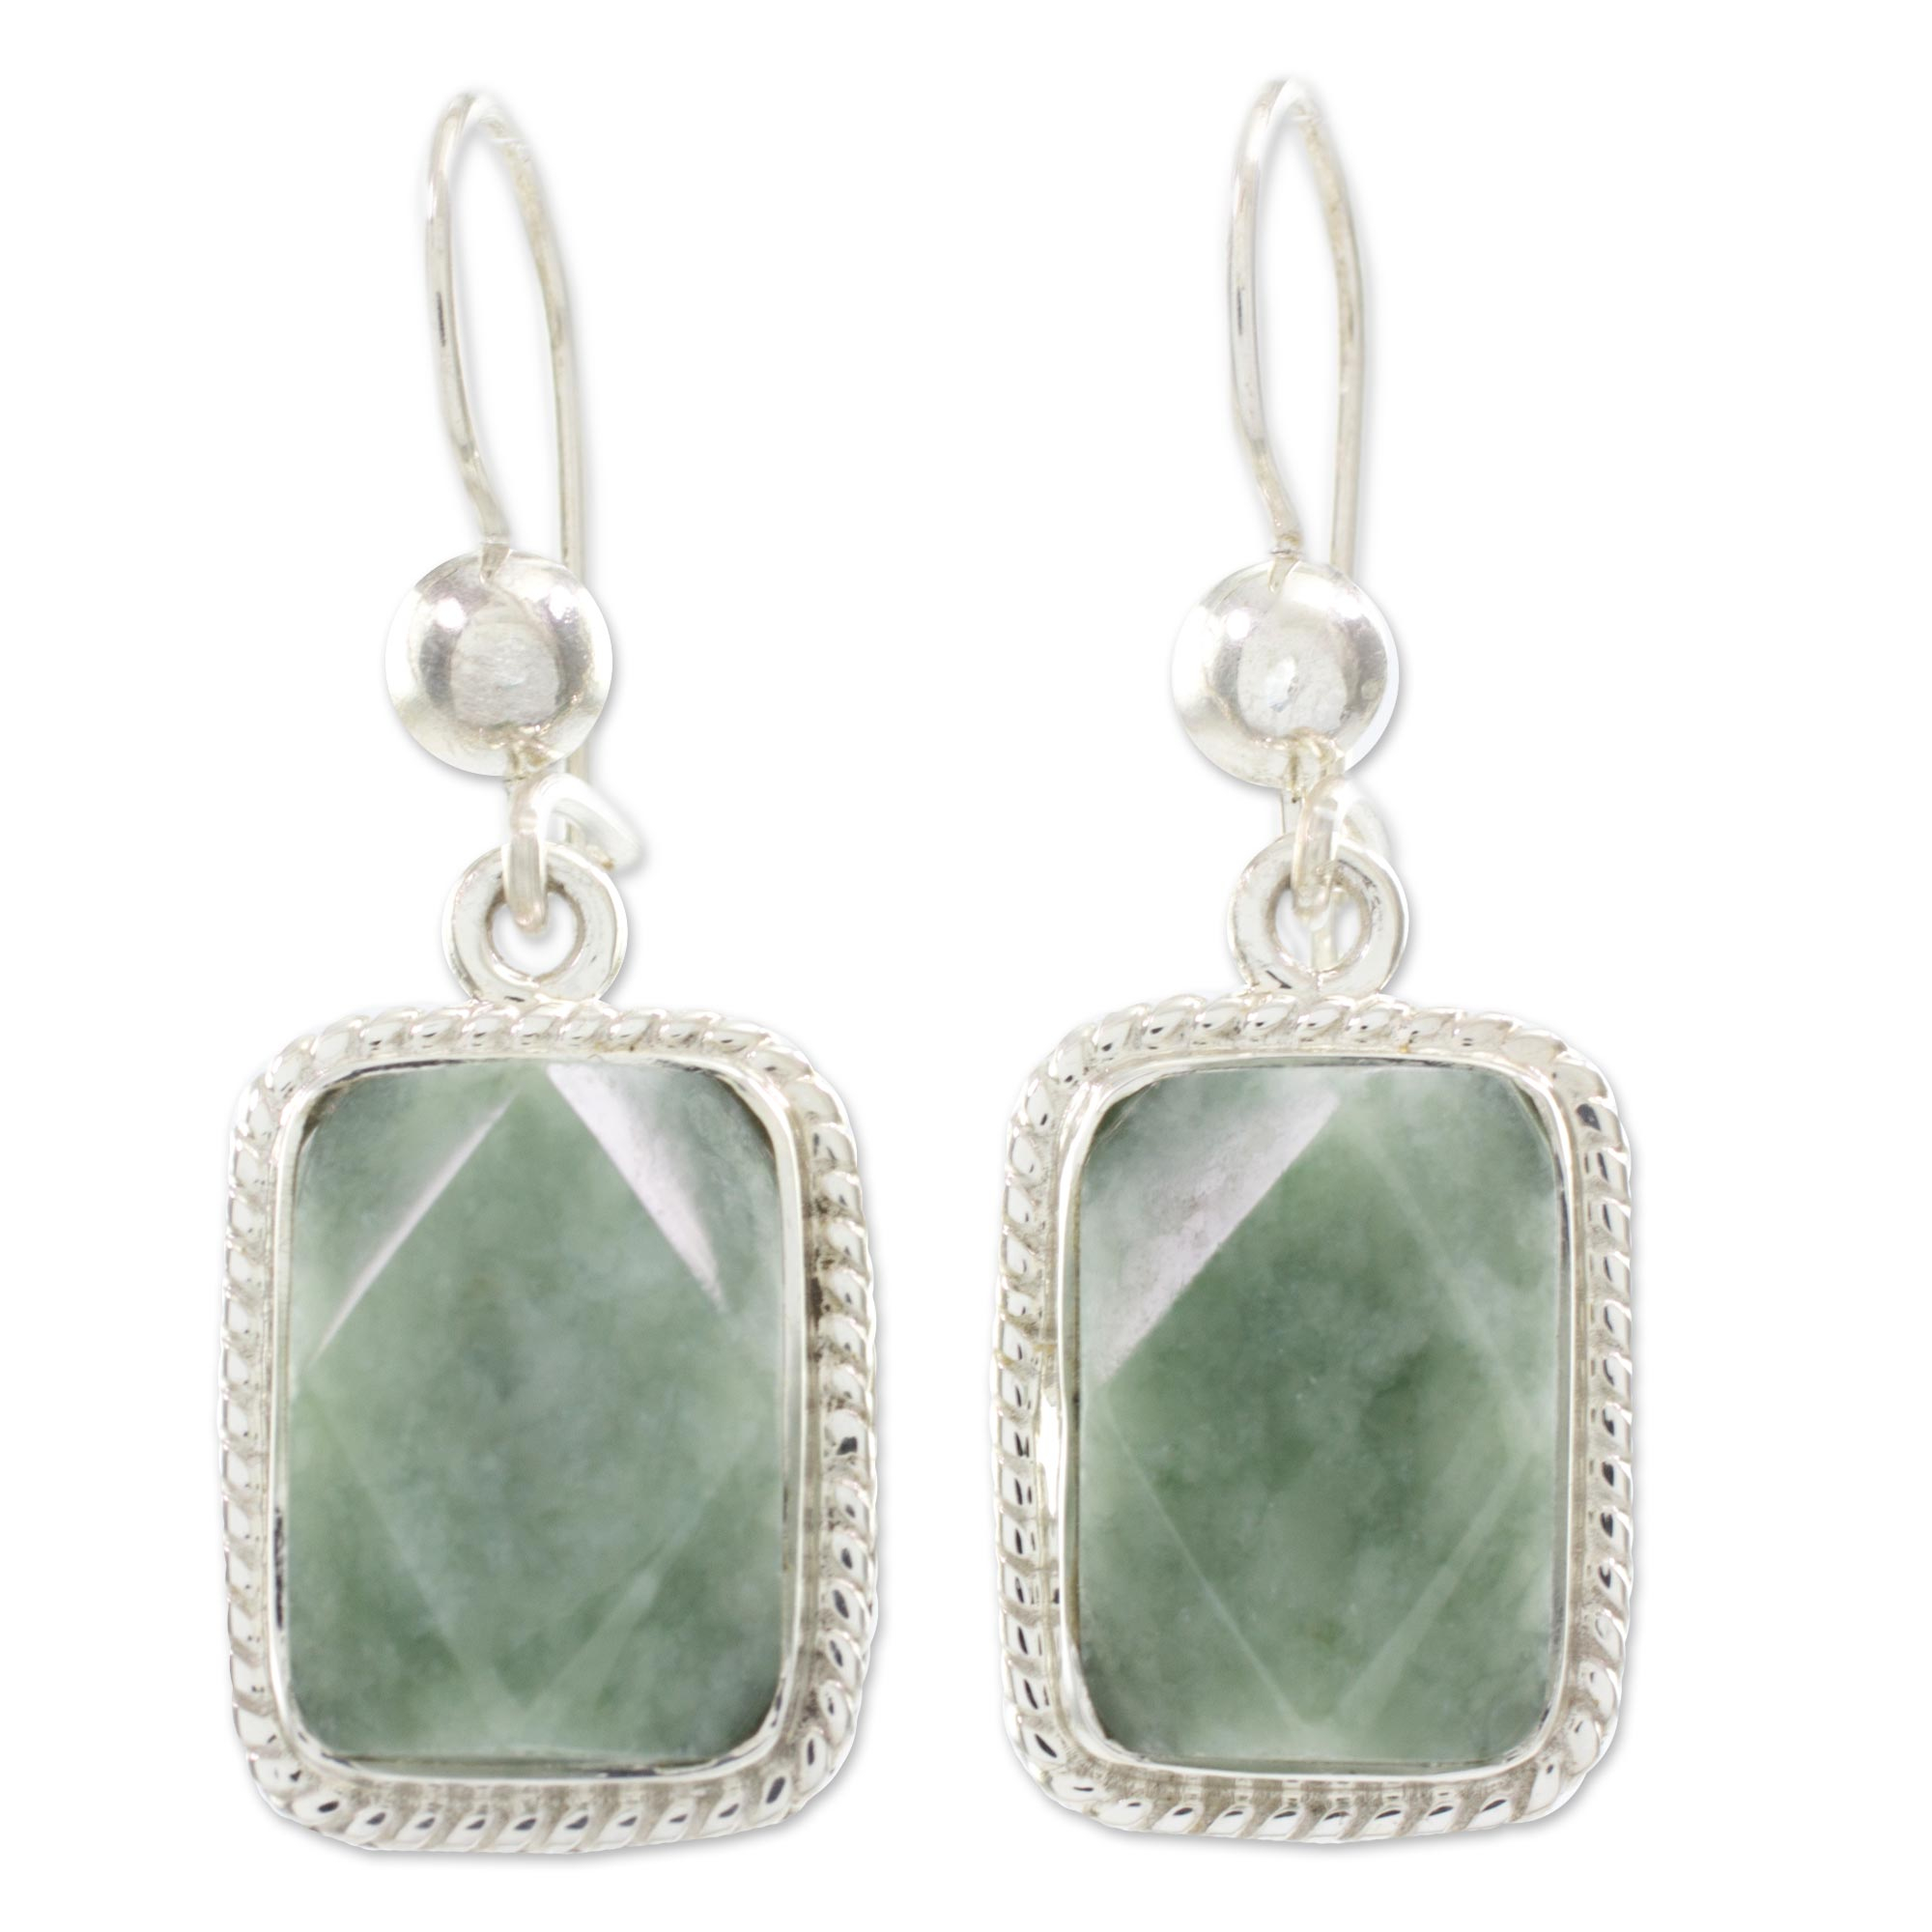 Guatemala Artisan Crafted Jade and Sterling Silver Earrings - Green ...